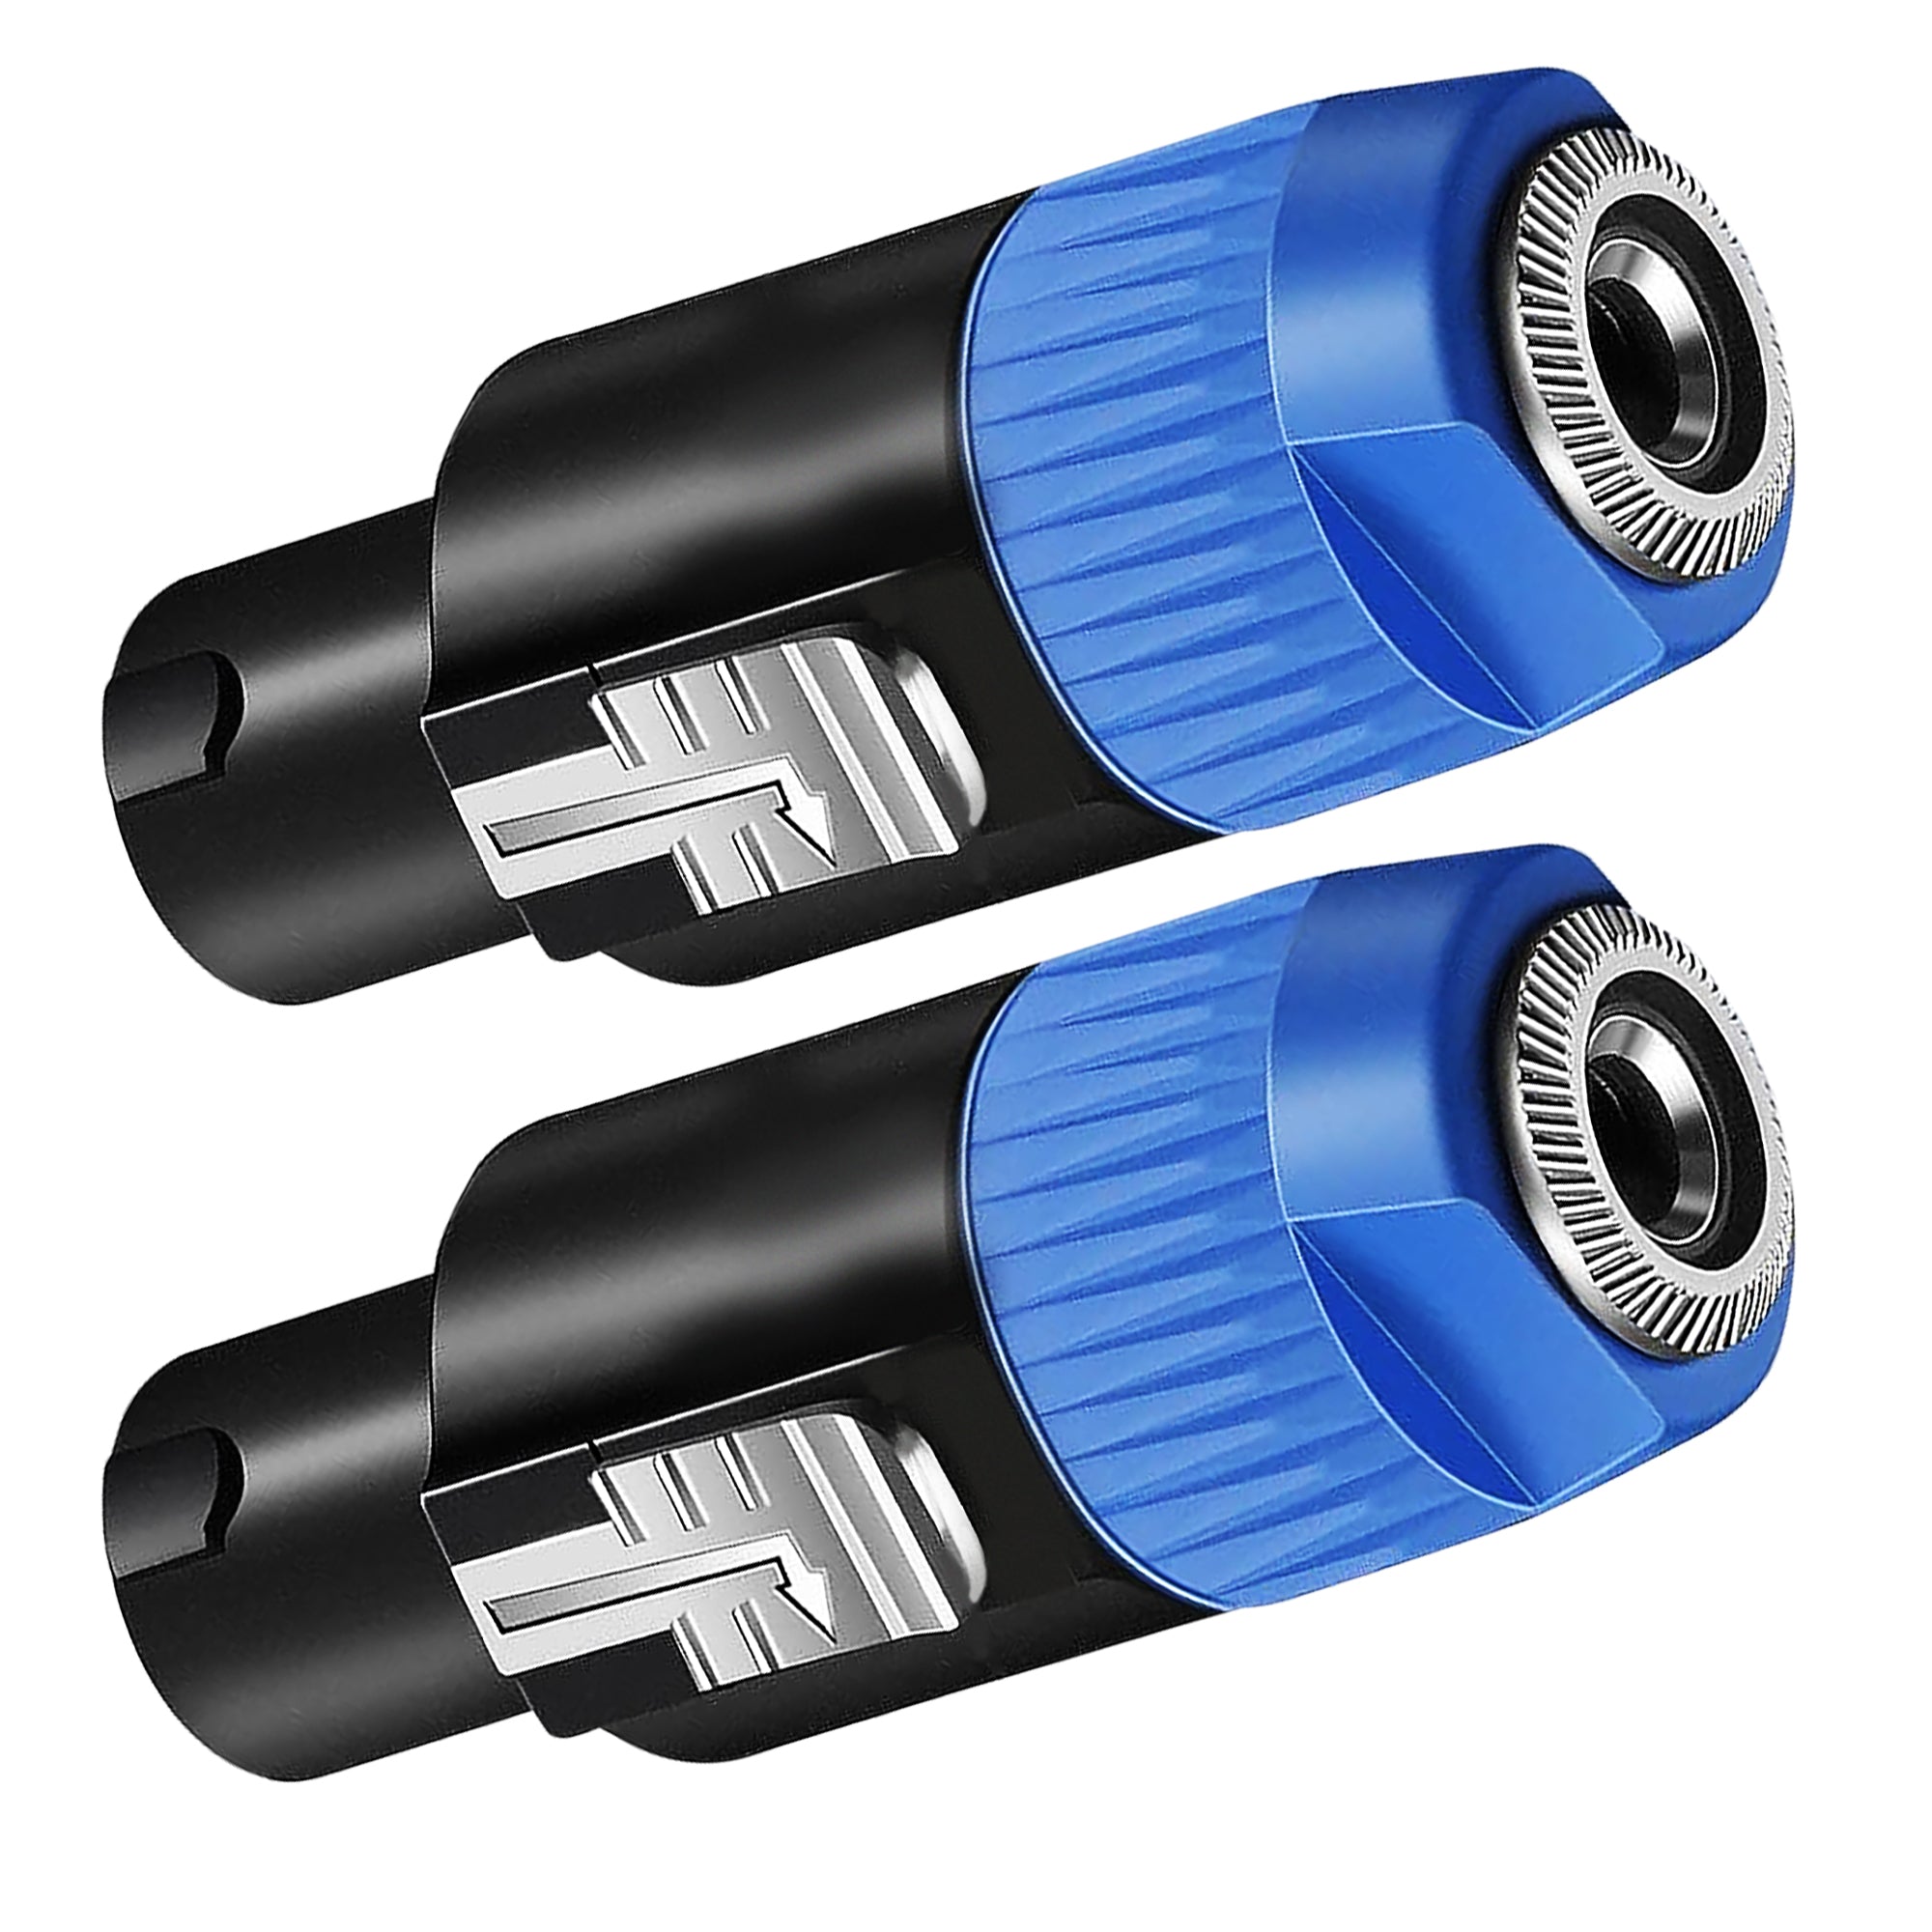 Pair of 5 Core Speakon Adapters: High-Quality Male Audio Pin Speaker Connectors for Secure Connections.